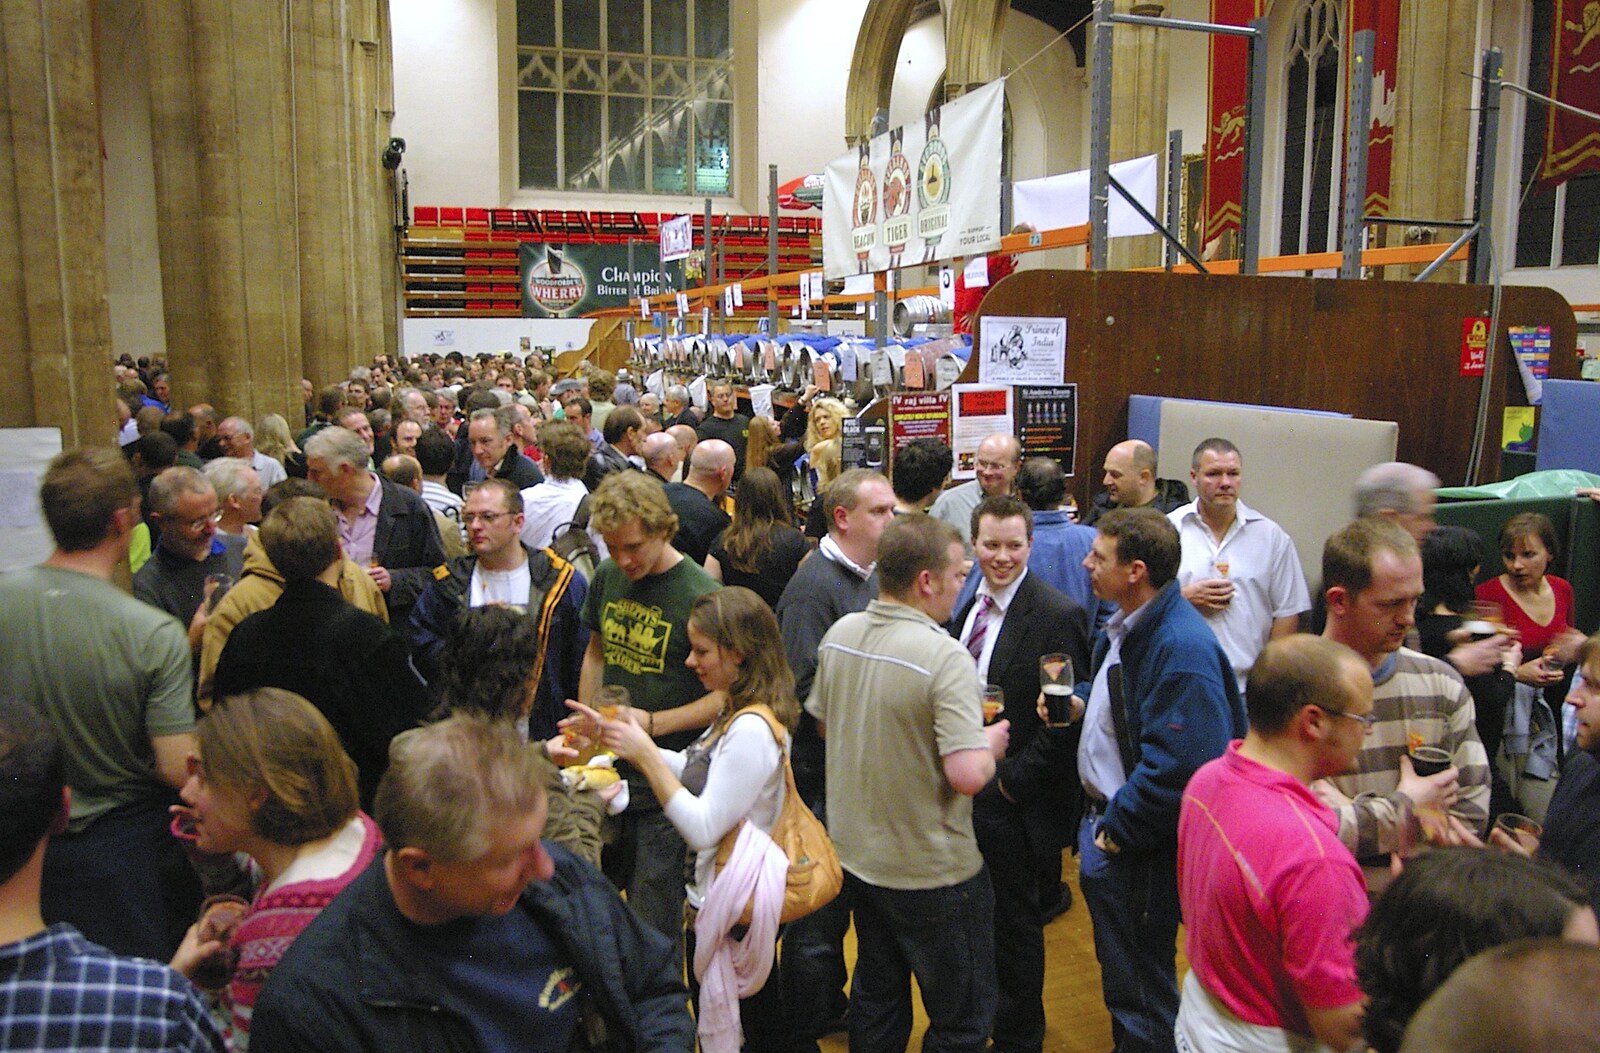 The crowds in St. Andrew's Hall from The CAMRA Norwich Beer Festival, St. Andrew's Hall, Norwich - 25th October 2006